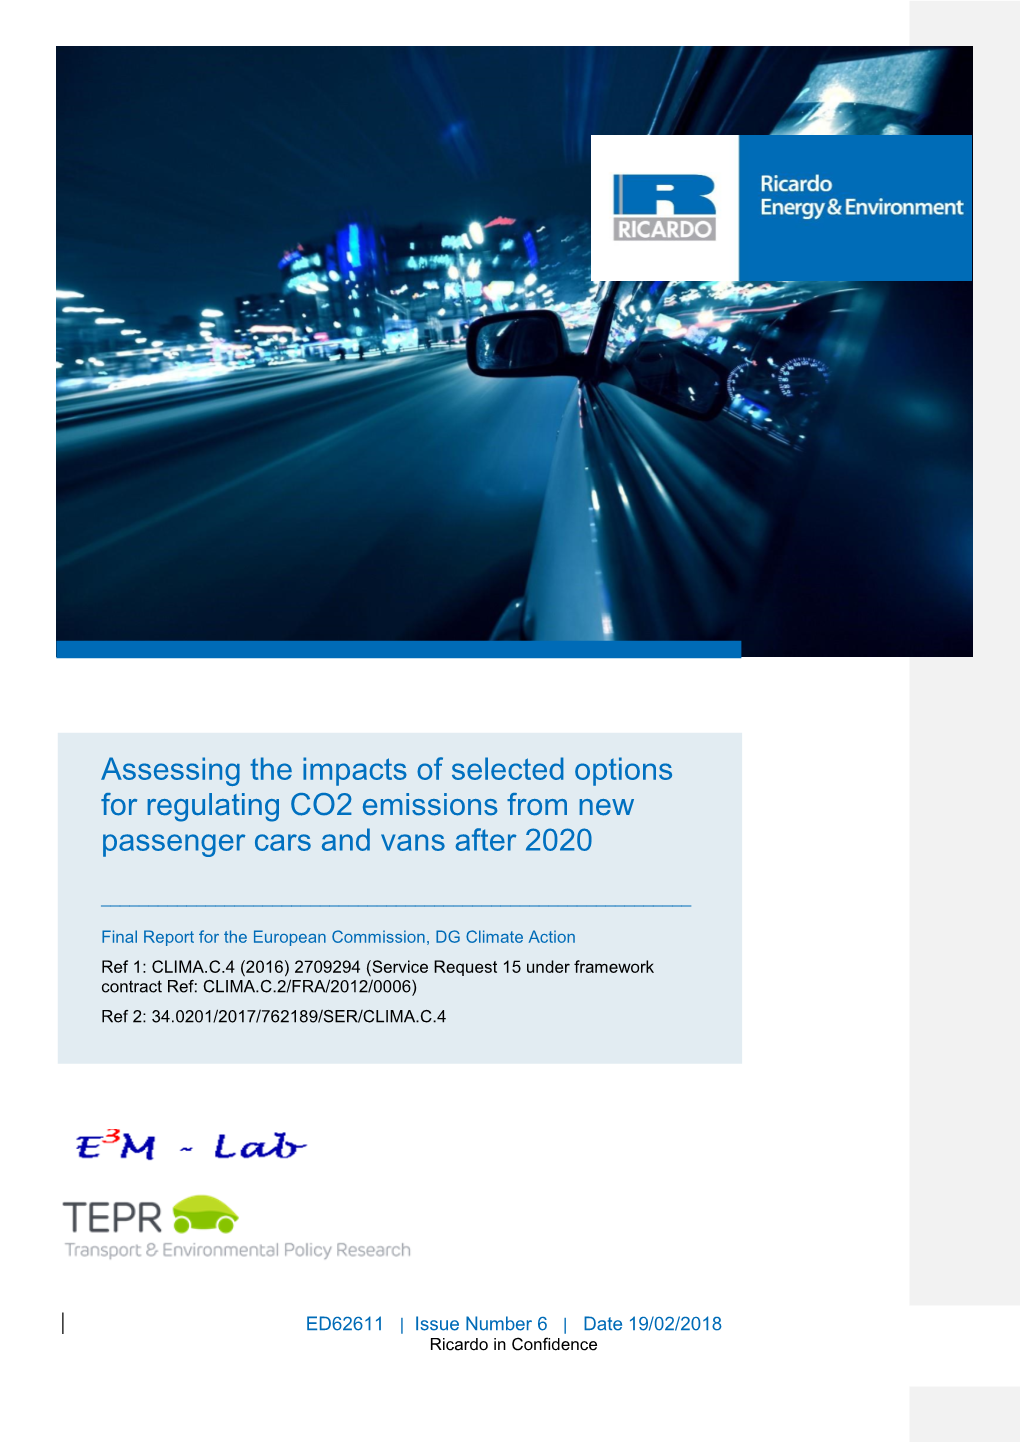 Assessing the Impacts of Selected Options for Regulating CO2 Emissions from New Passenger Cars and Vans After 2020